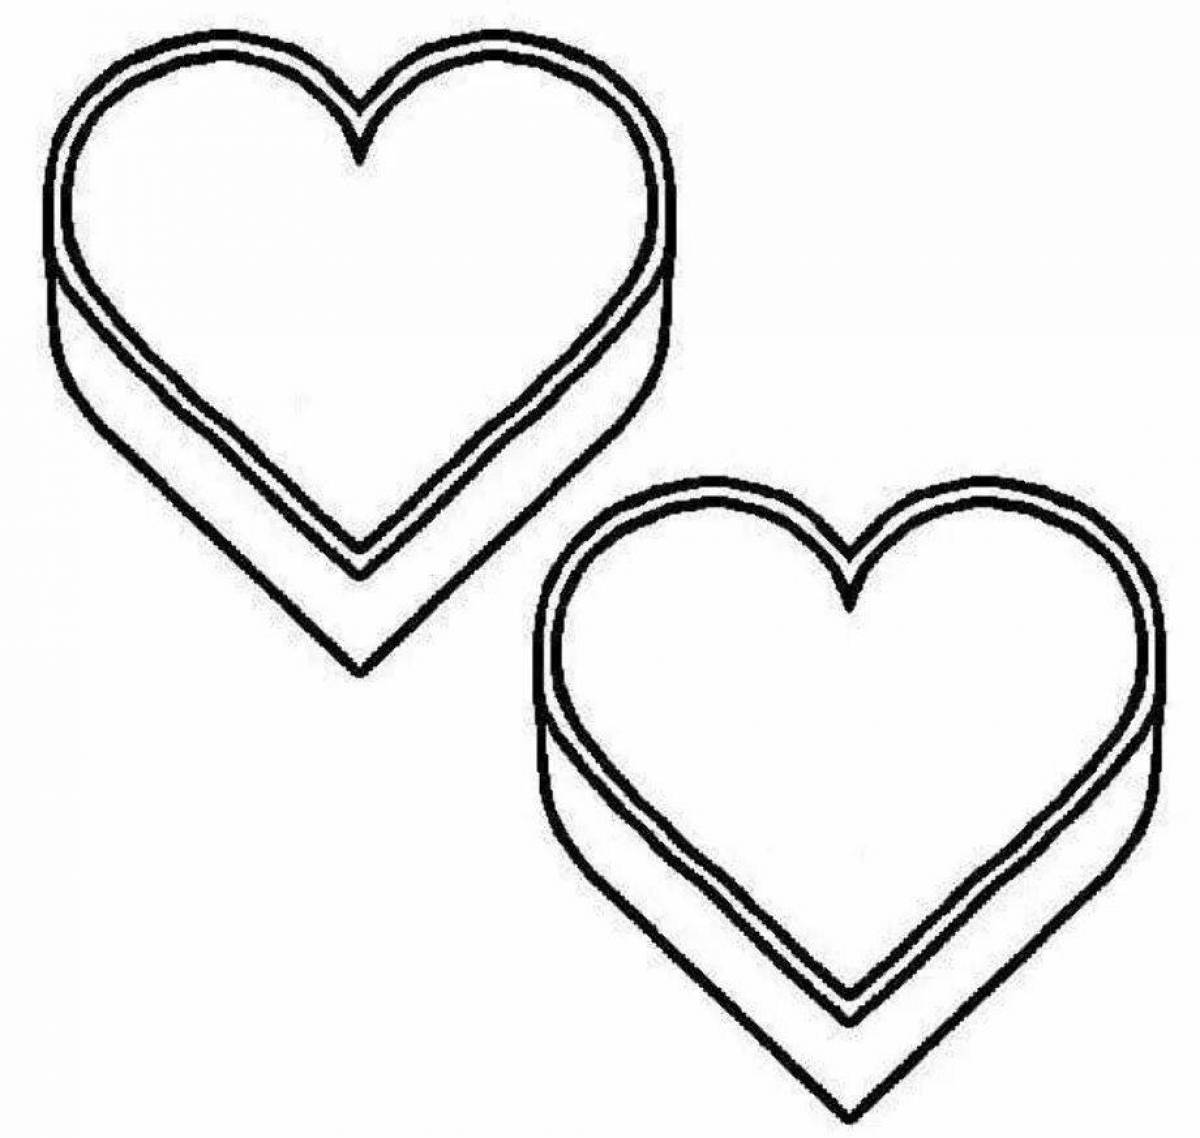 Glorious heart coloring page for 3-4 year olds